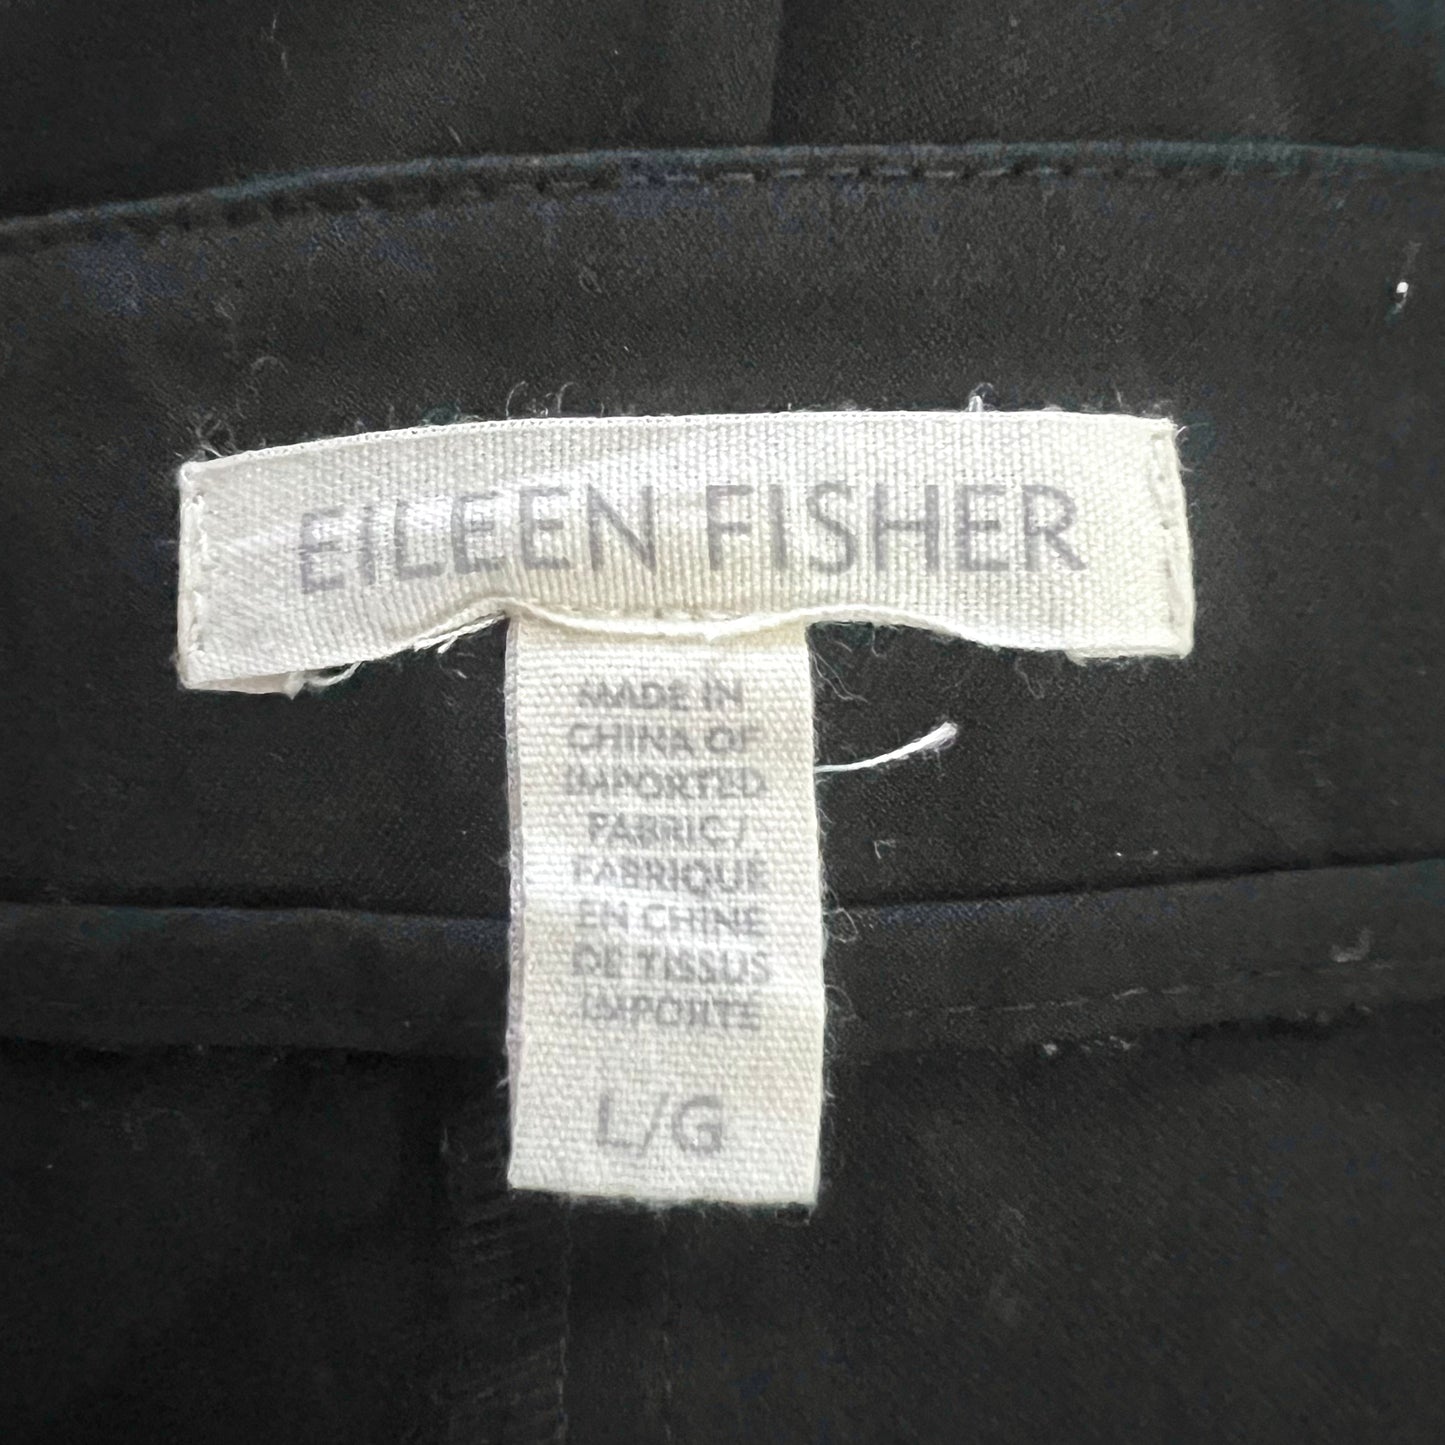 Pants Ankle By Eileen Fisher  Size: L